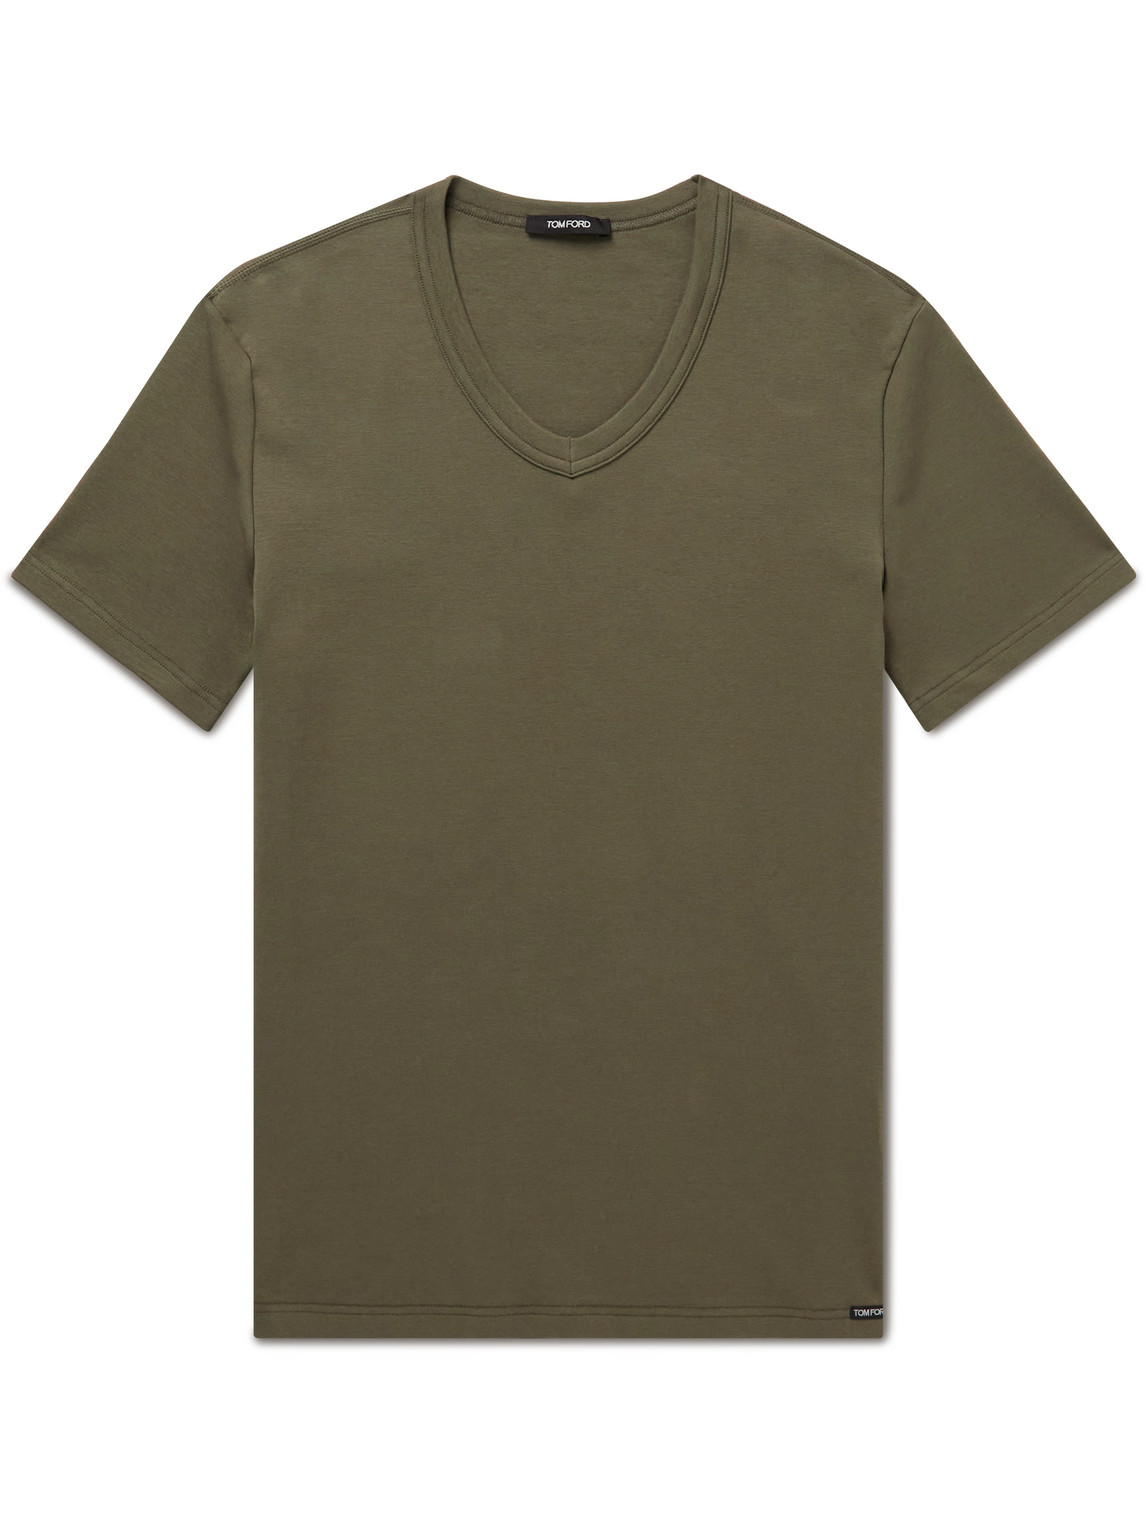 TOM FORD STRETCH-COTTON JERSEY T-SHIRT